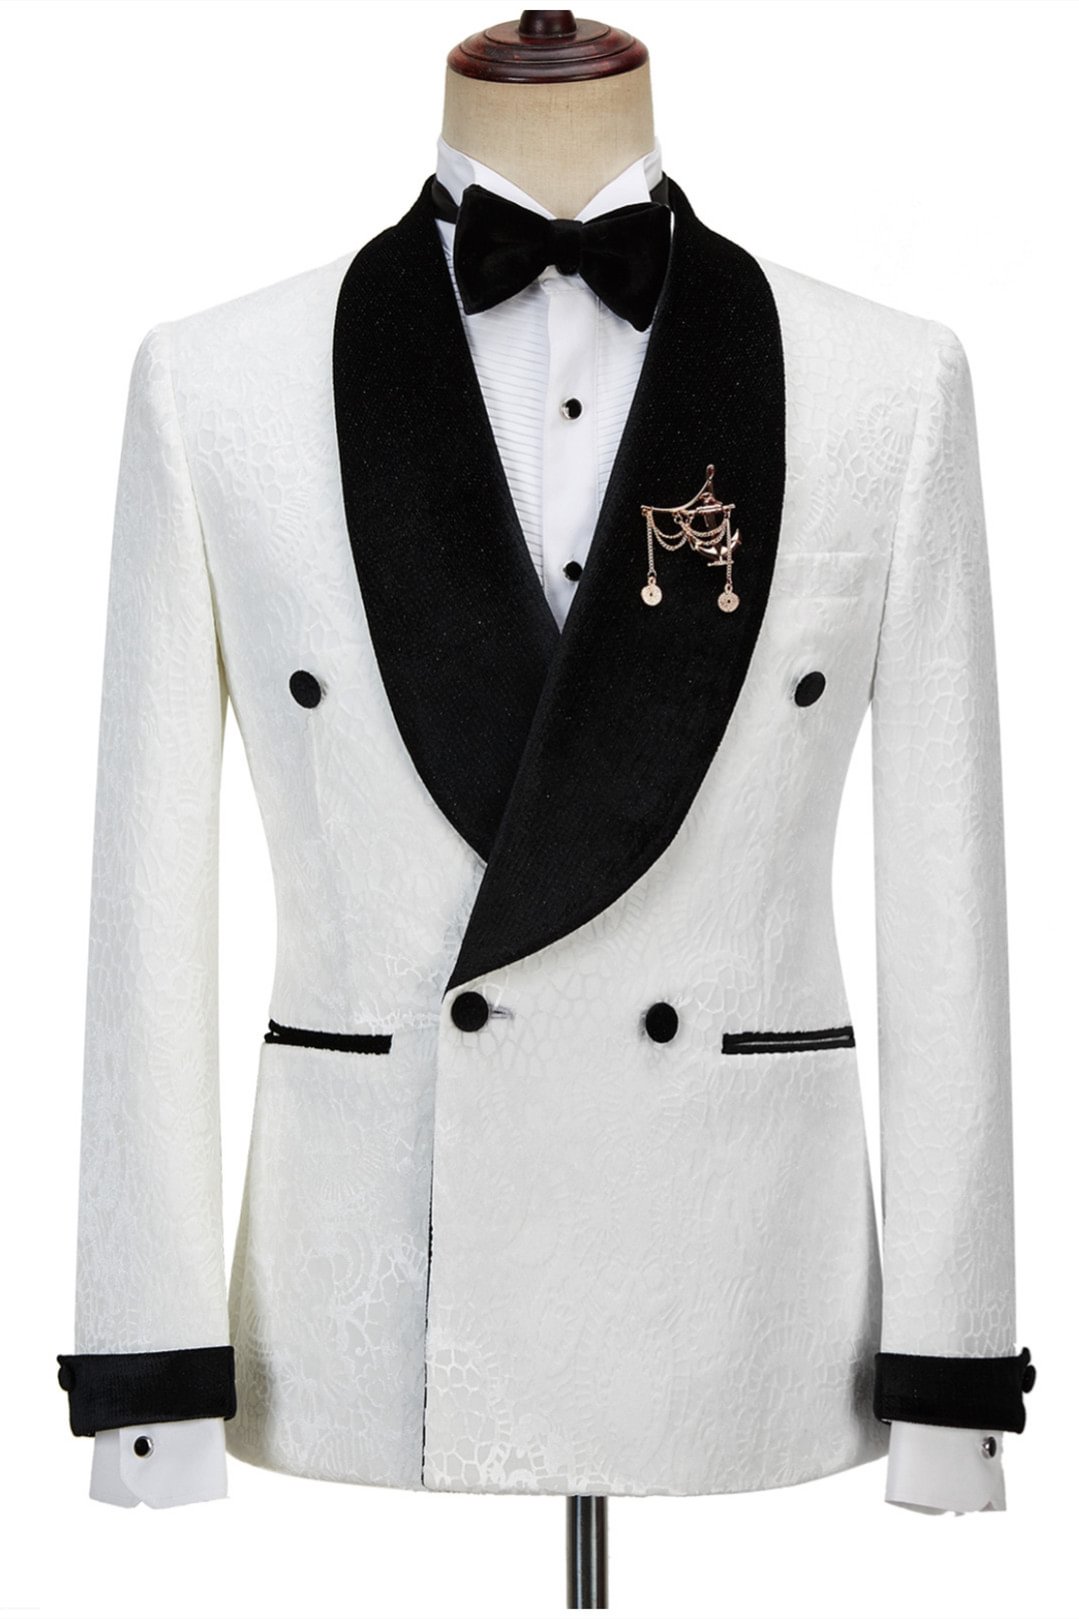 White Sparkle Shawl Lapel Reception Jacquard Suit For Guys Double Breasted | Ballbellas Ballbellas